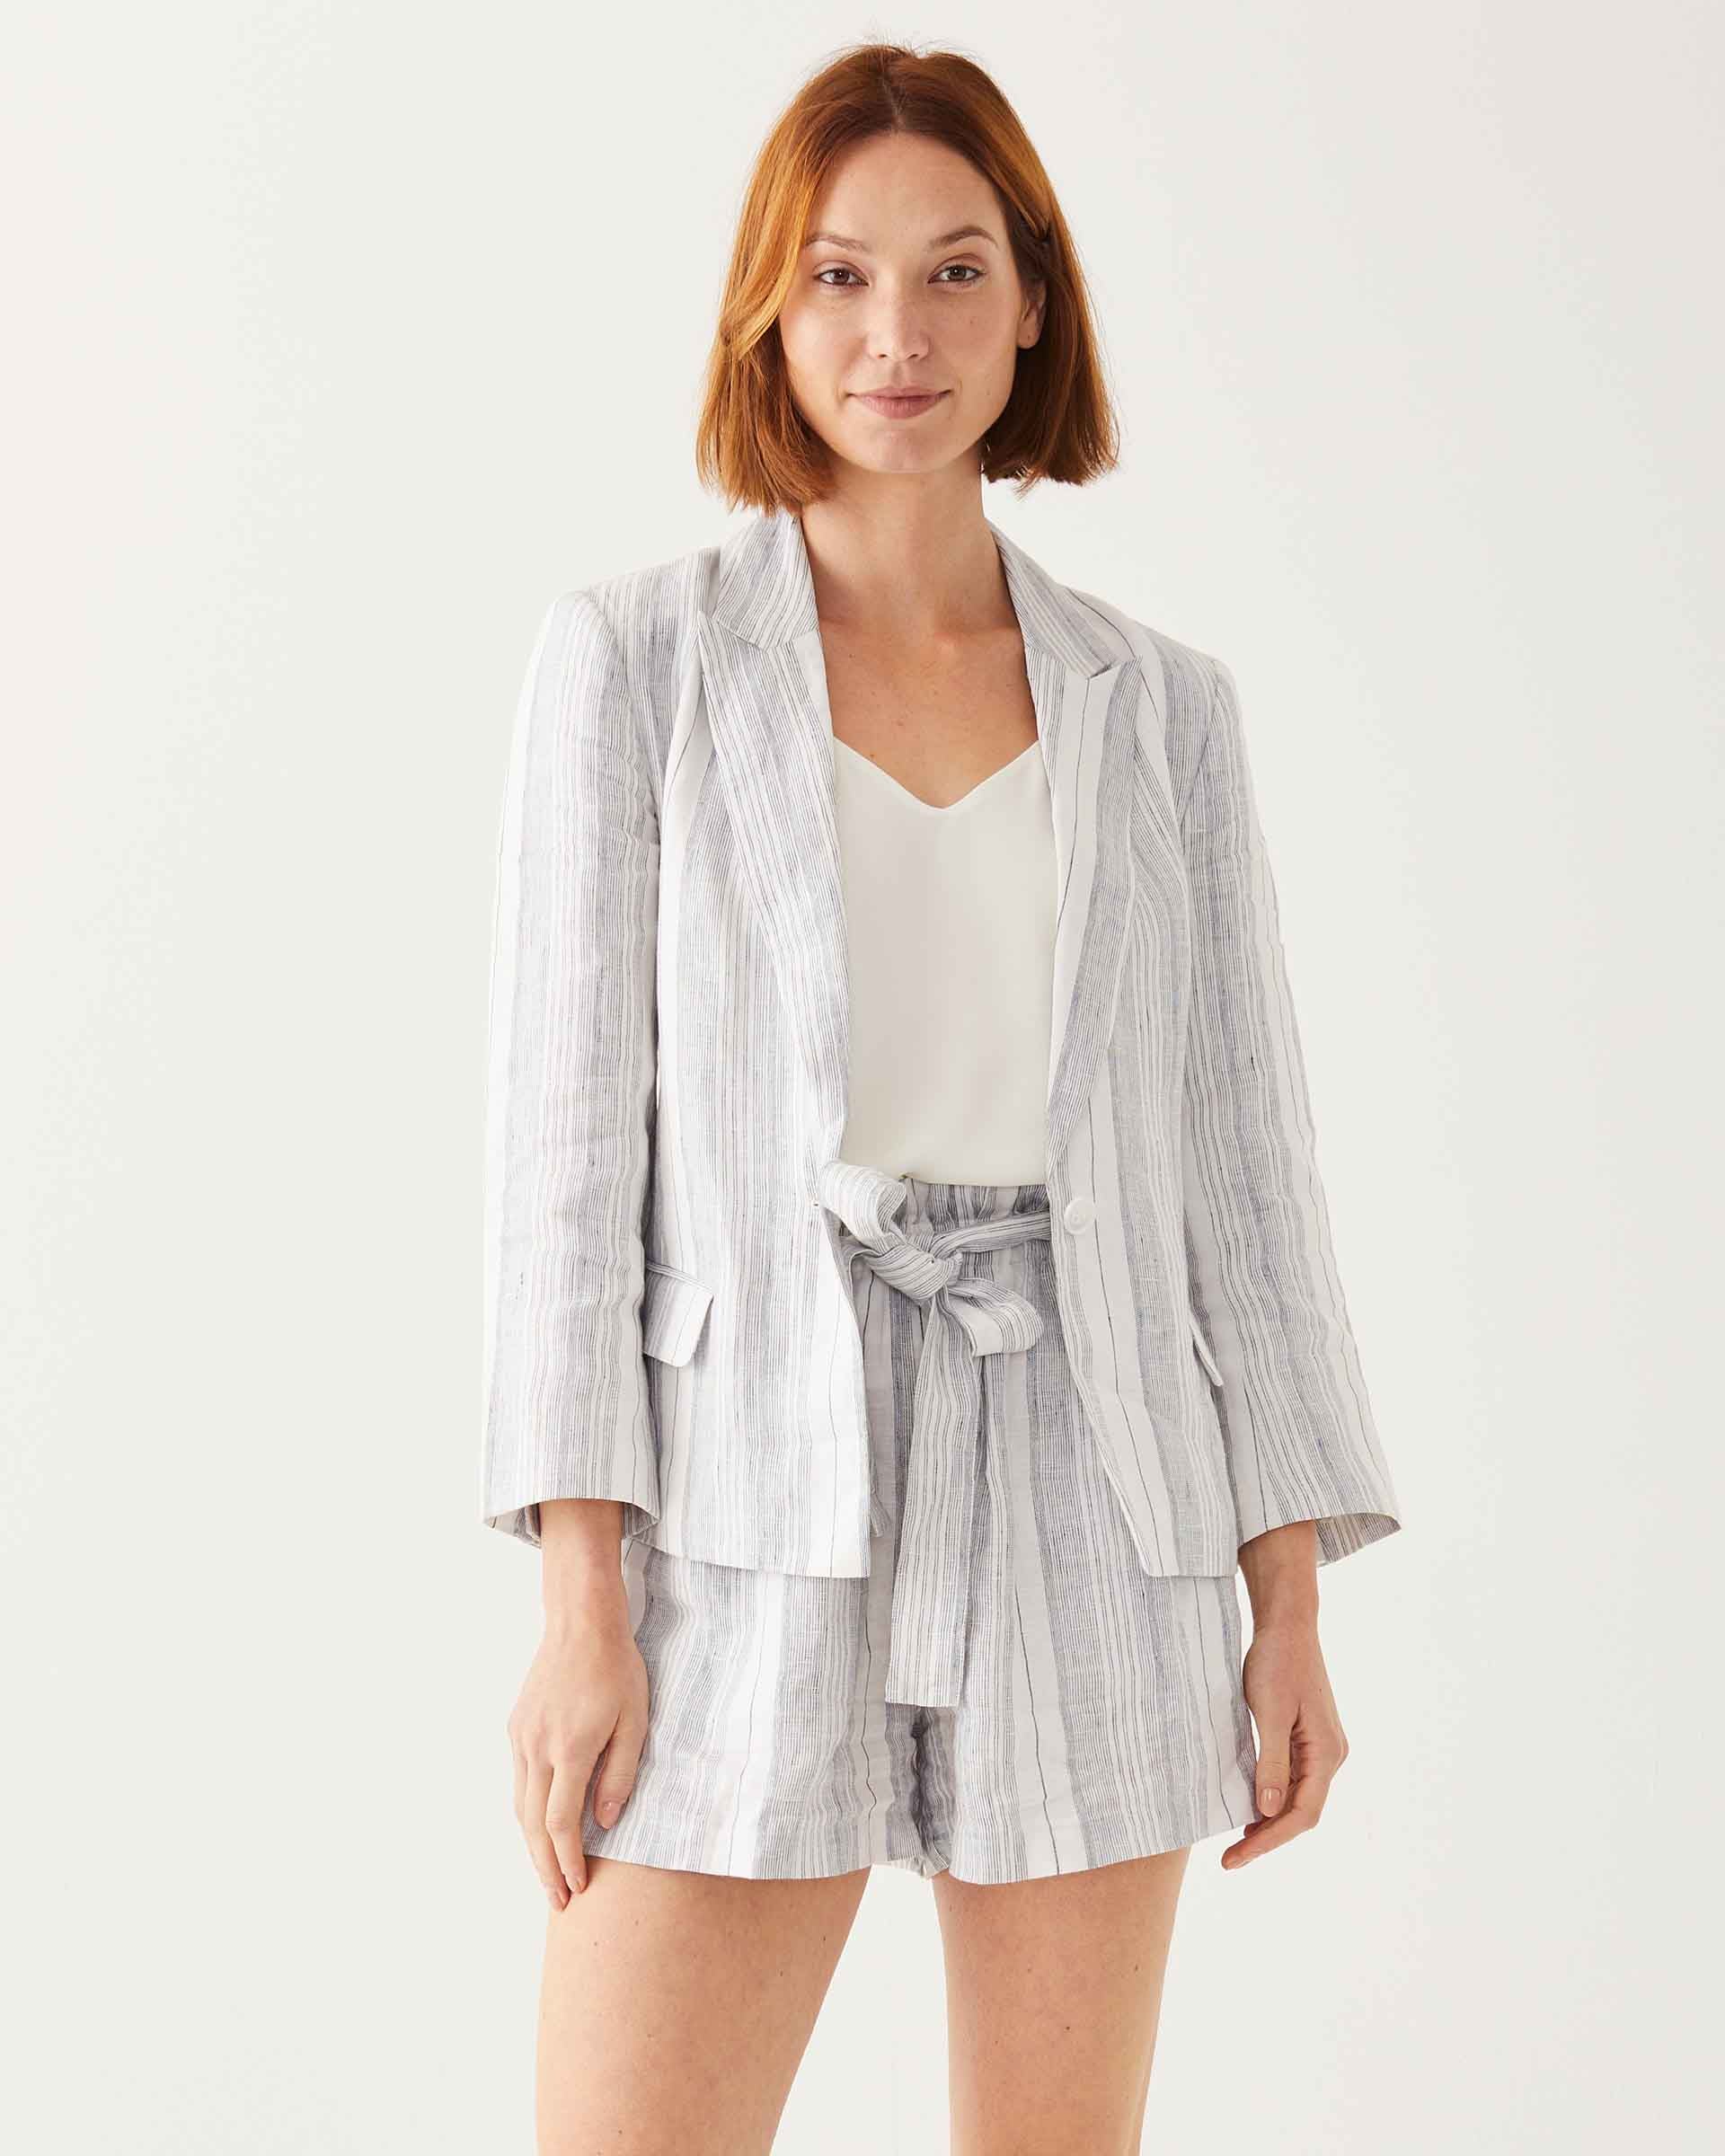 close up of female wearing navy striped white linen blazer and matching shorts on white background